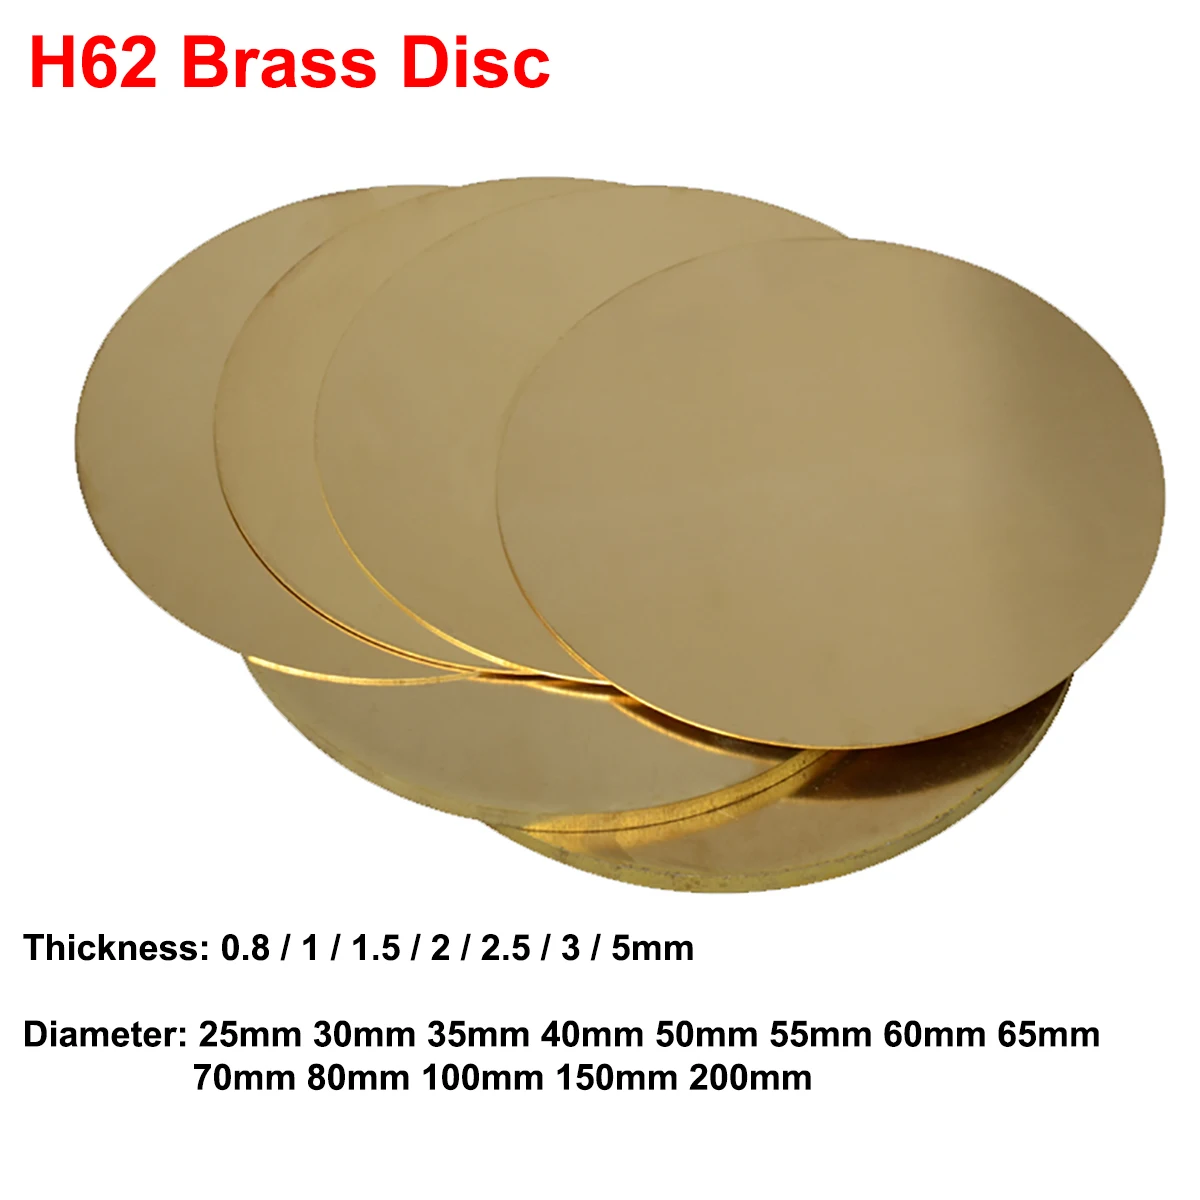 

H62 Brass Disc Dia 25mm - 200mm Thickness 0.8mm 1mm 1.5mm 2mm Brass Gasket Pure Copper Round Plate Brass Parts Cutting